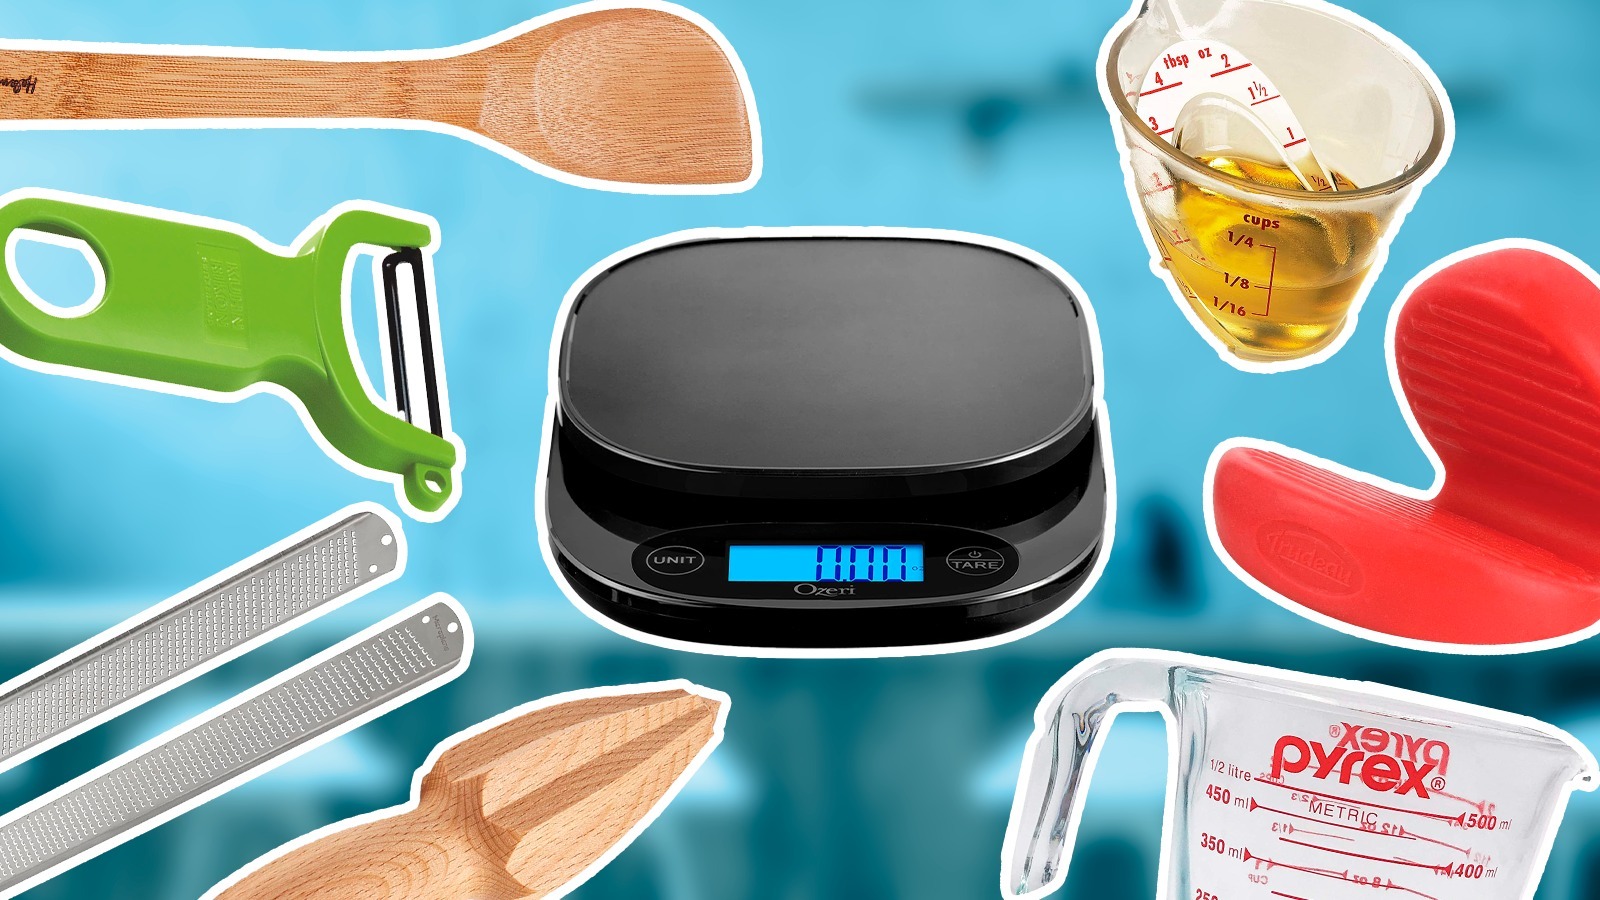 15 Kitchen Tools We All Have But Don't Need + What To Use Instead